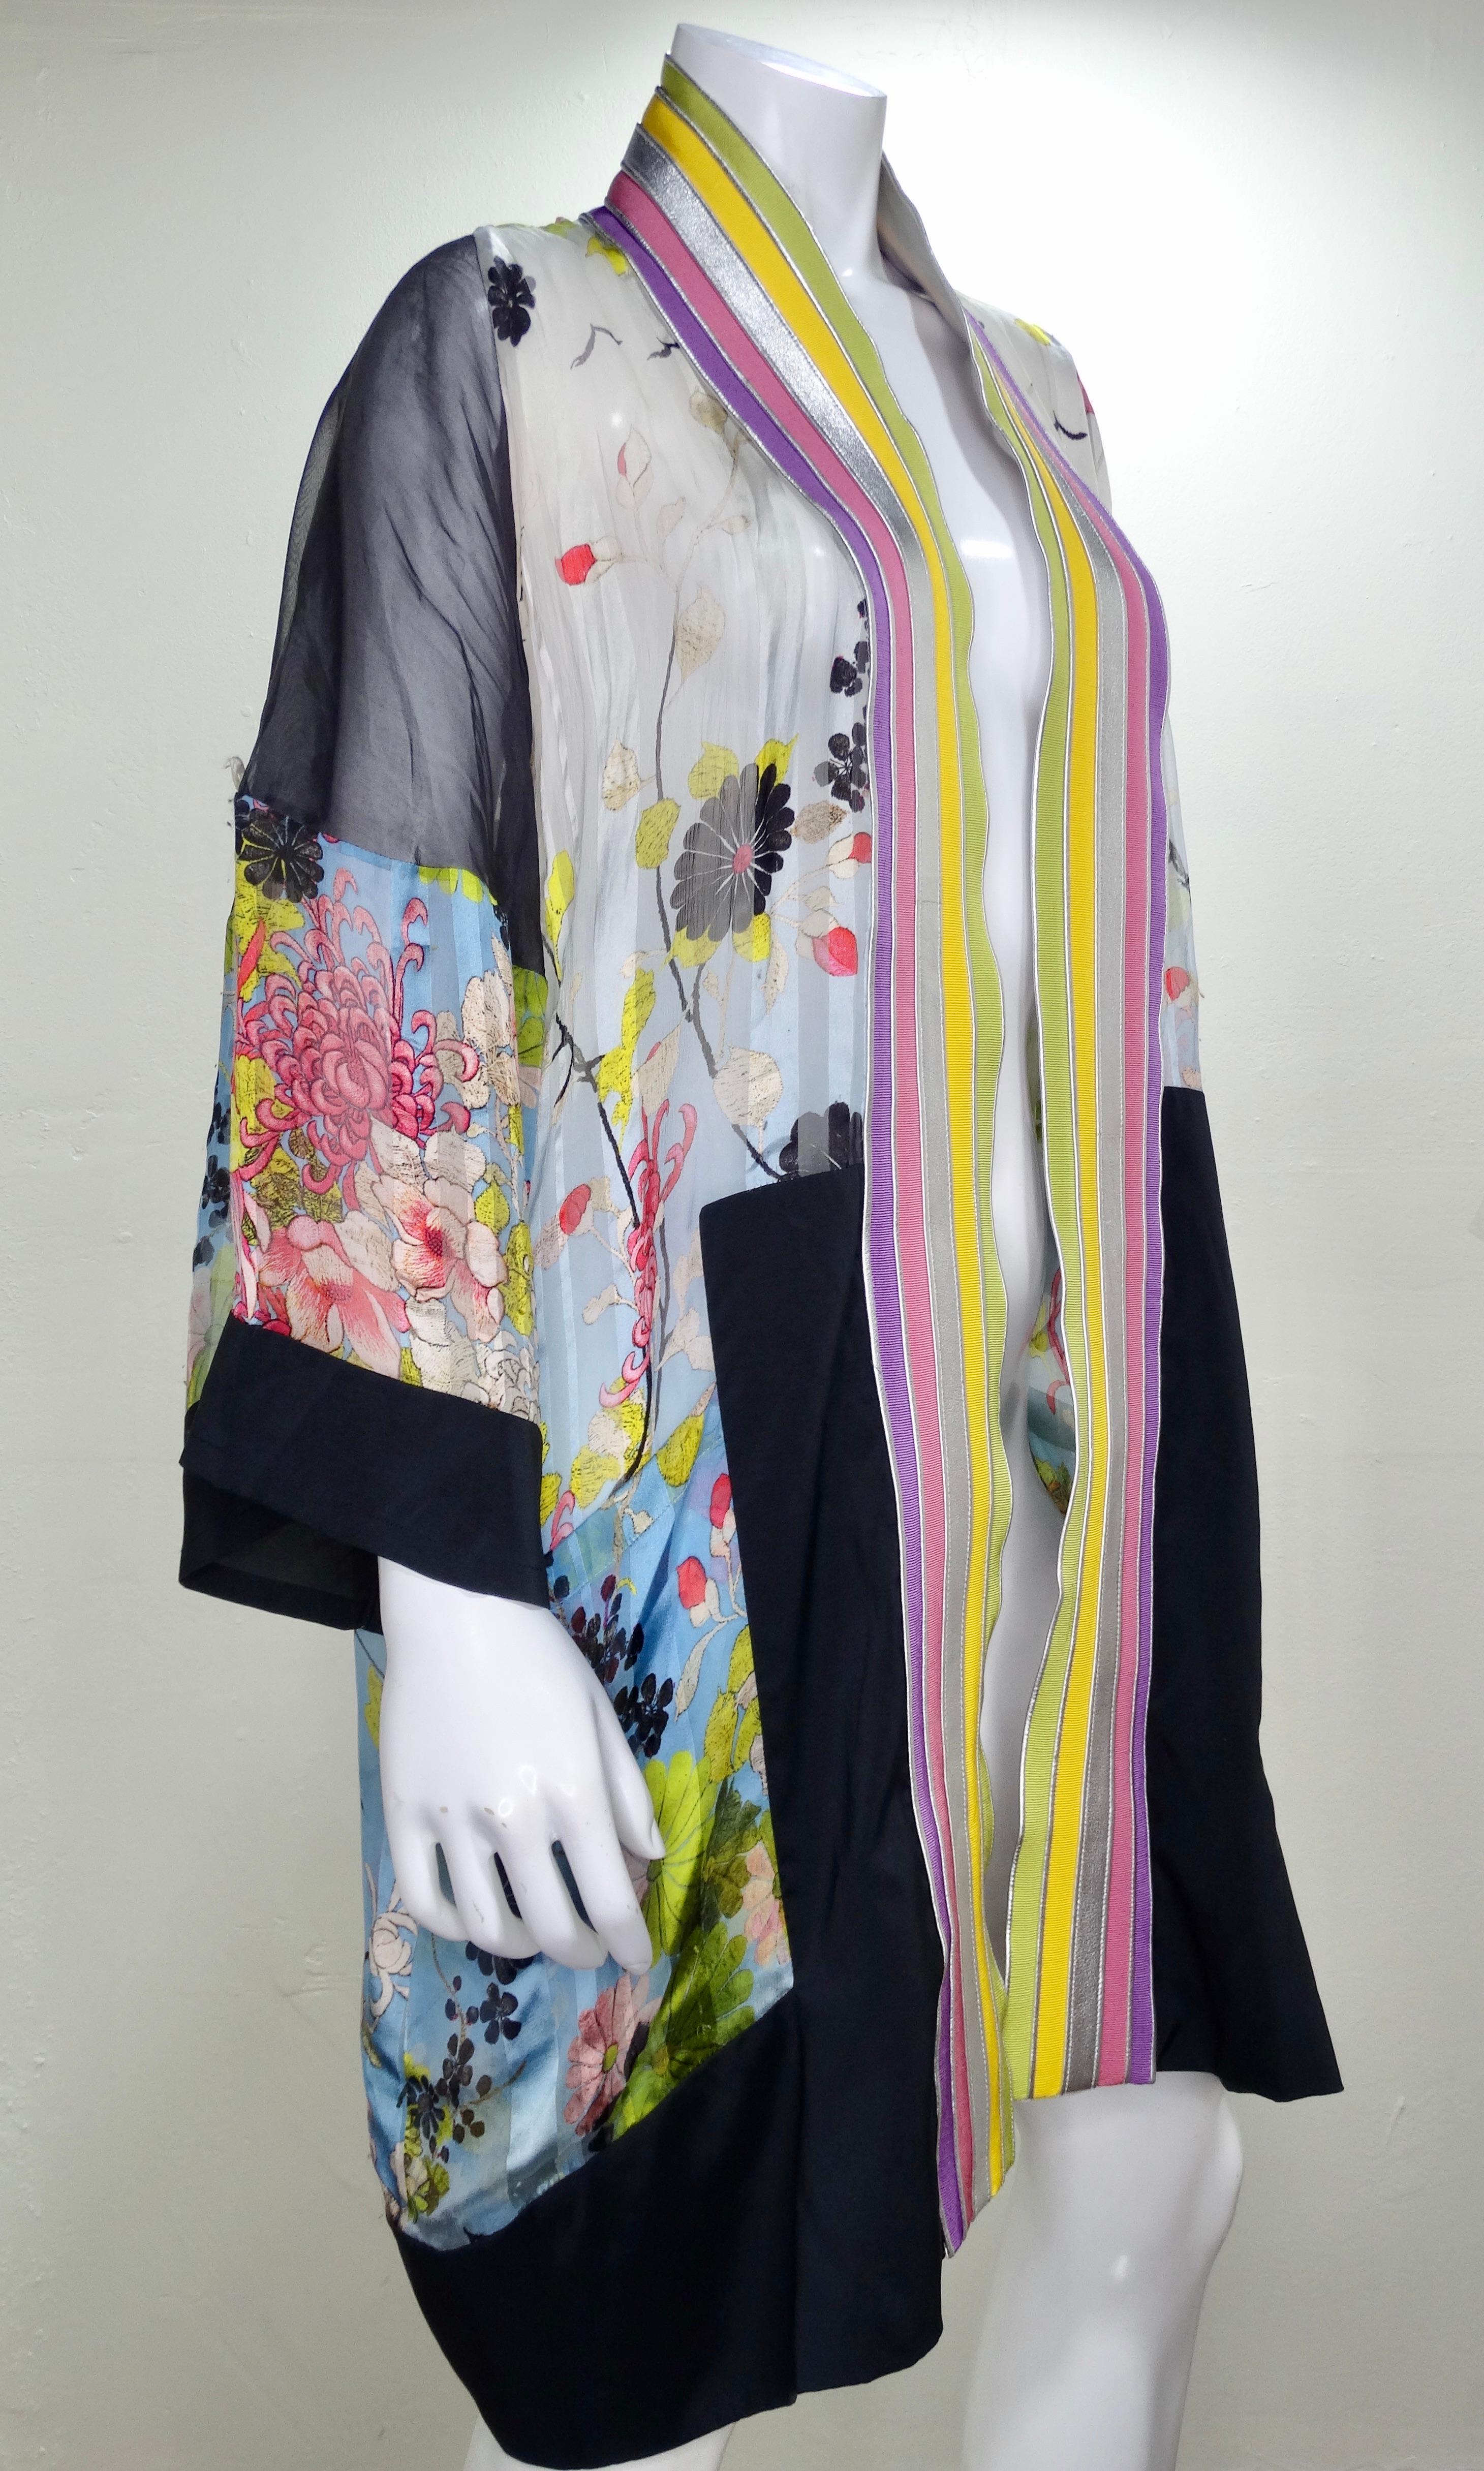 Add some color to your look with this beautiful JPG kimono jacket! Circa 2002s, this piece features a colorful floral print with a multi-colored fabric and leather trim in the front. Loose and flowy fit with two front pockets and sleeves that can be